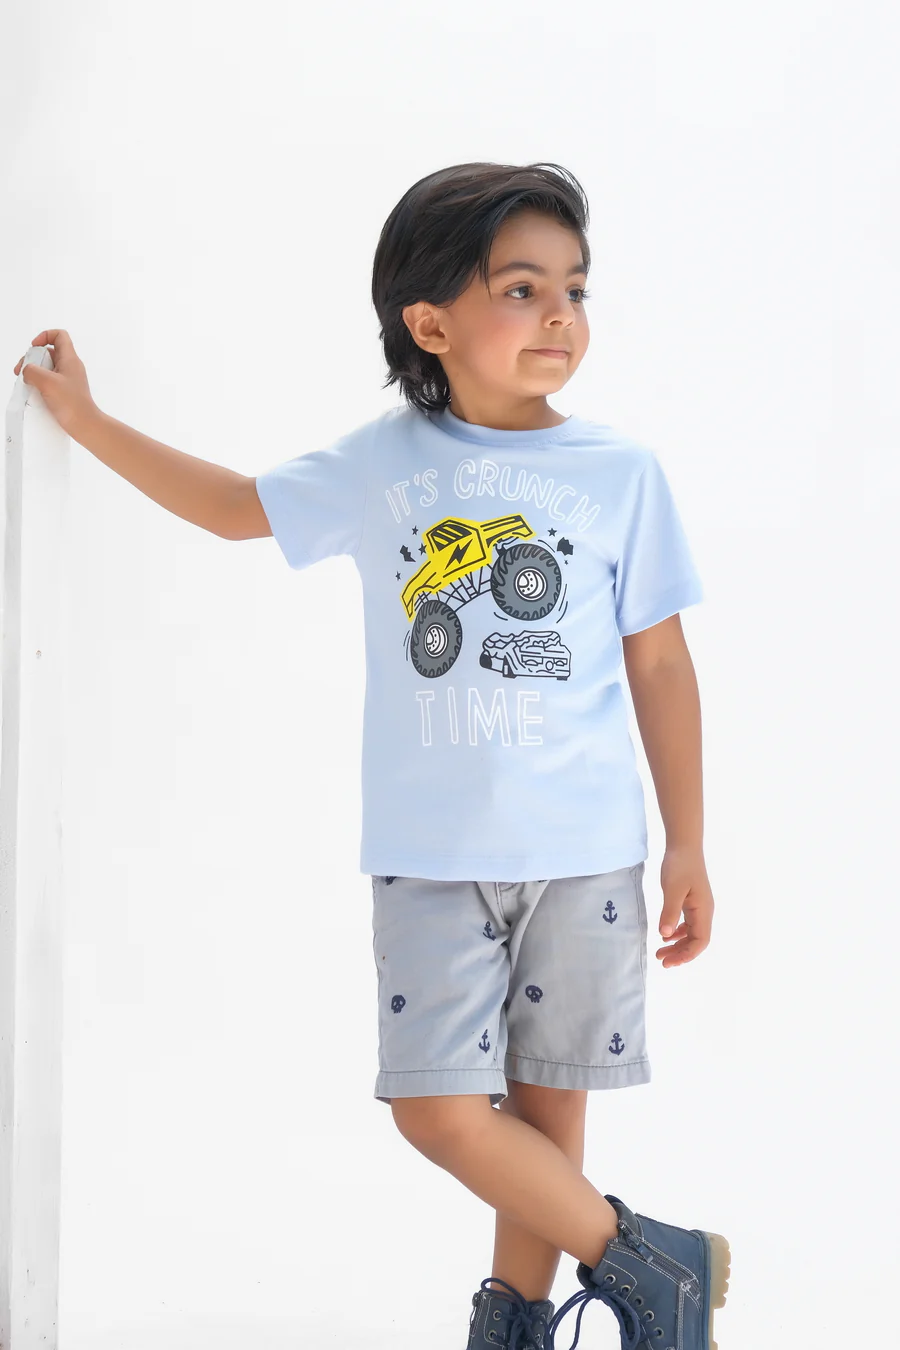 It's Crunch Time - Half Sleeves T-Shirts For Kids - Light Blue - SBT-346